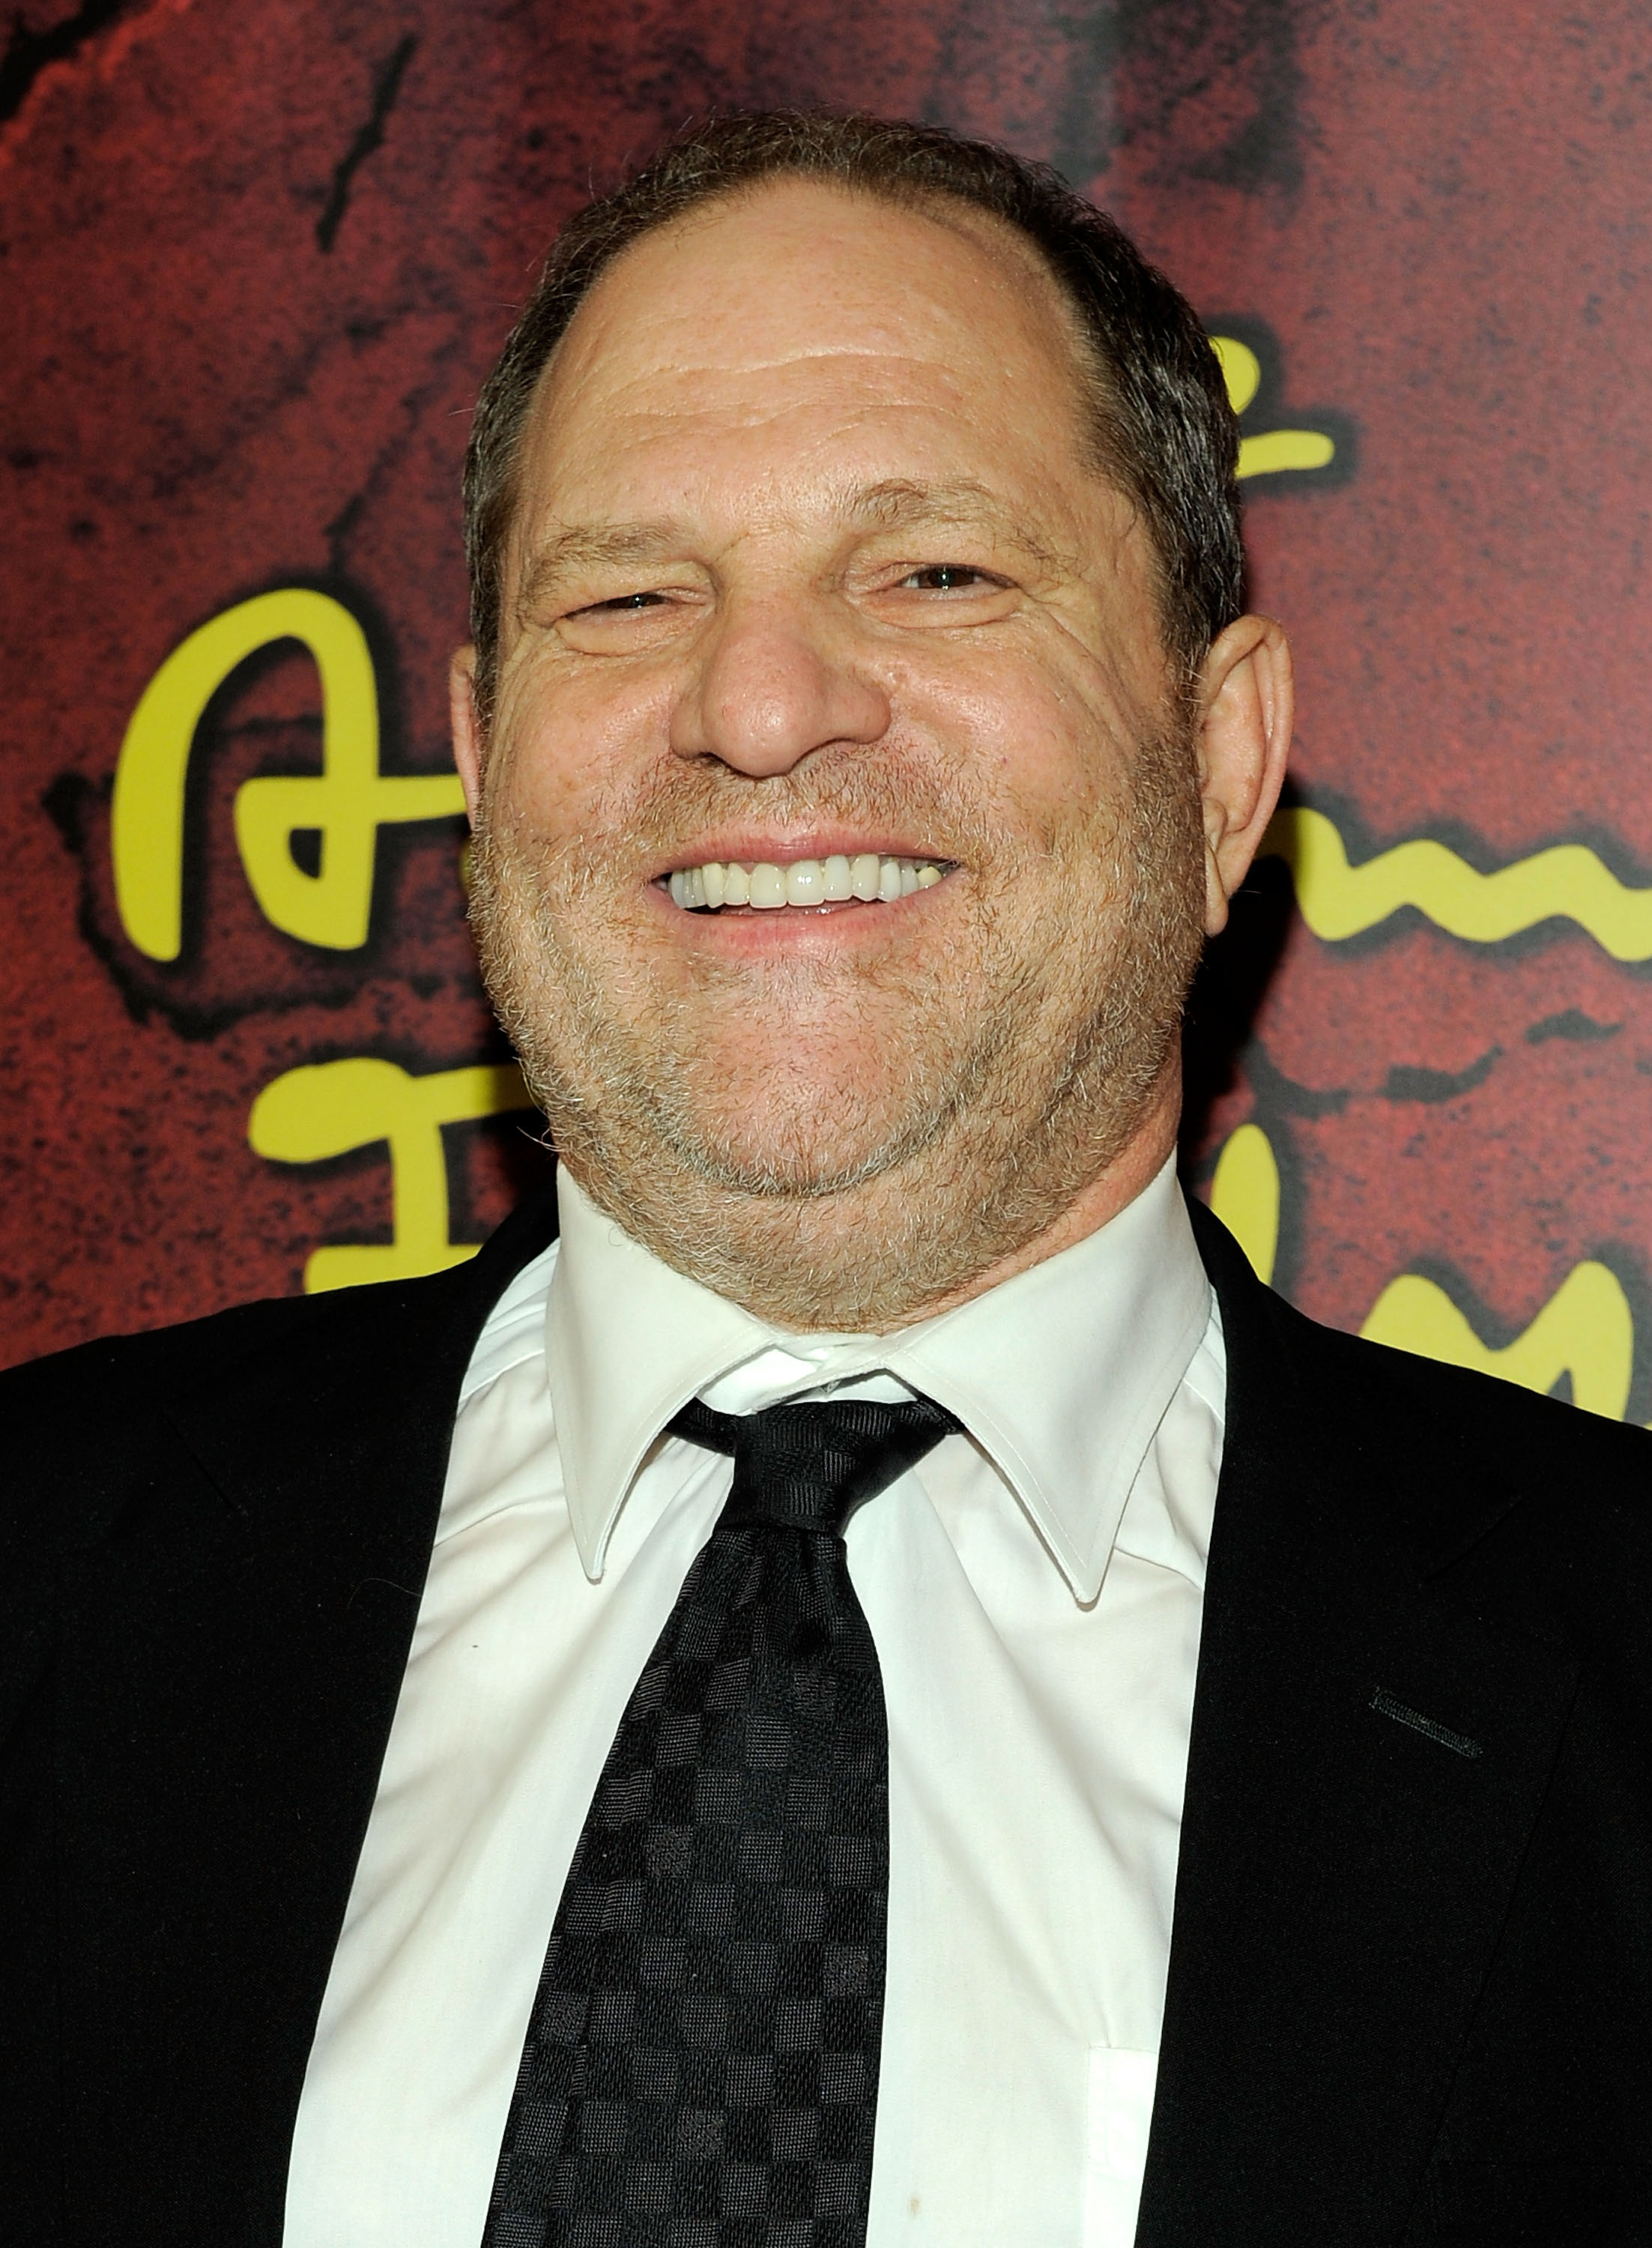 Harvey Weinstein at the Broadway opening of "The Addams Family" on April 8, 2010 in New York. | Source: Getty Images